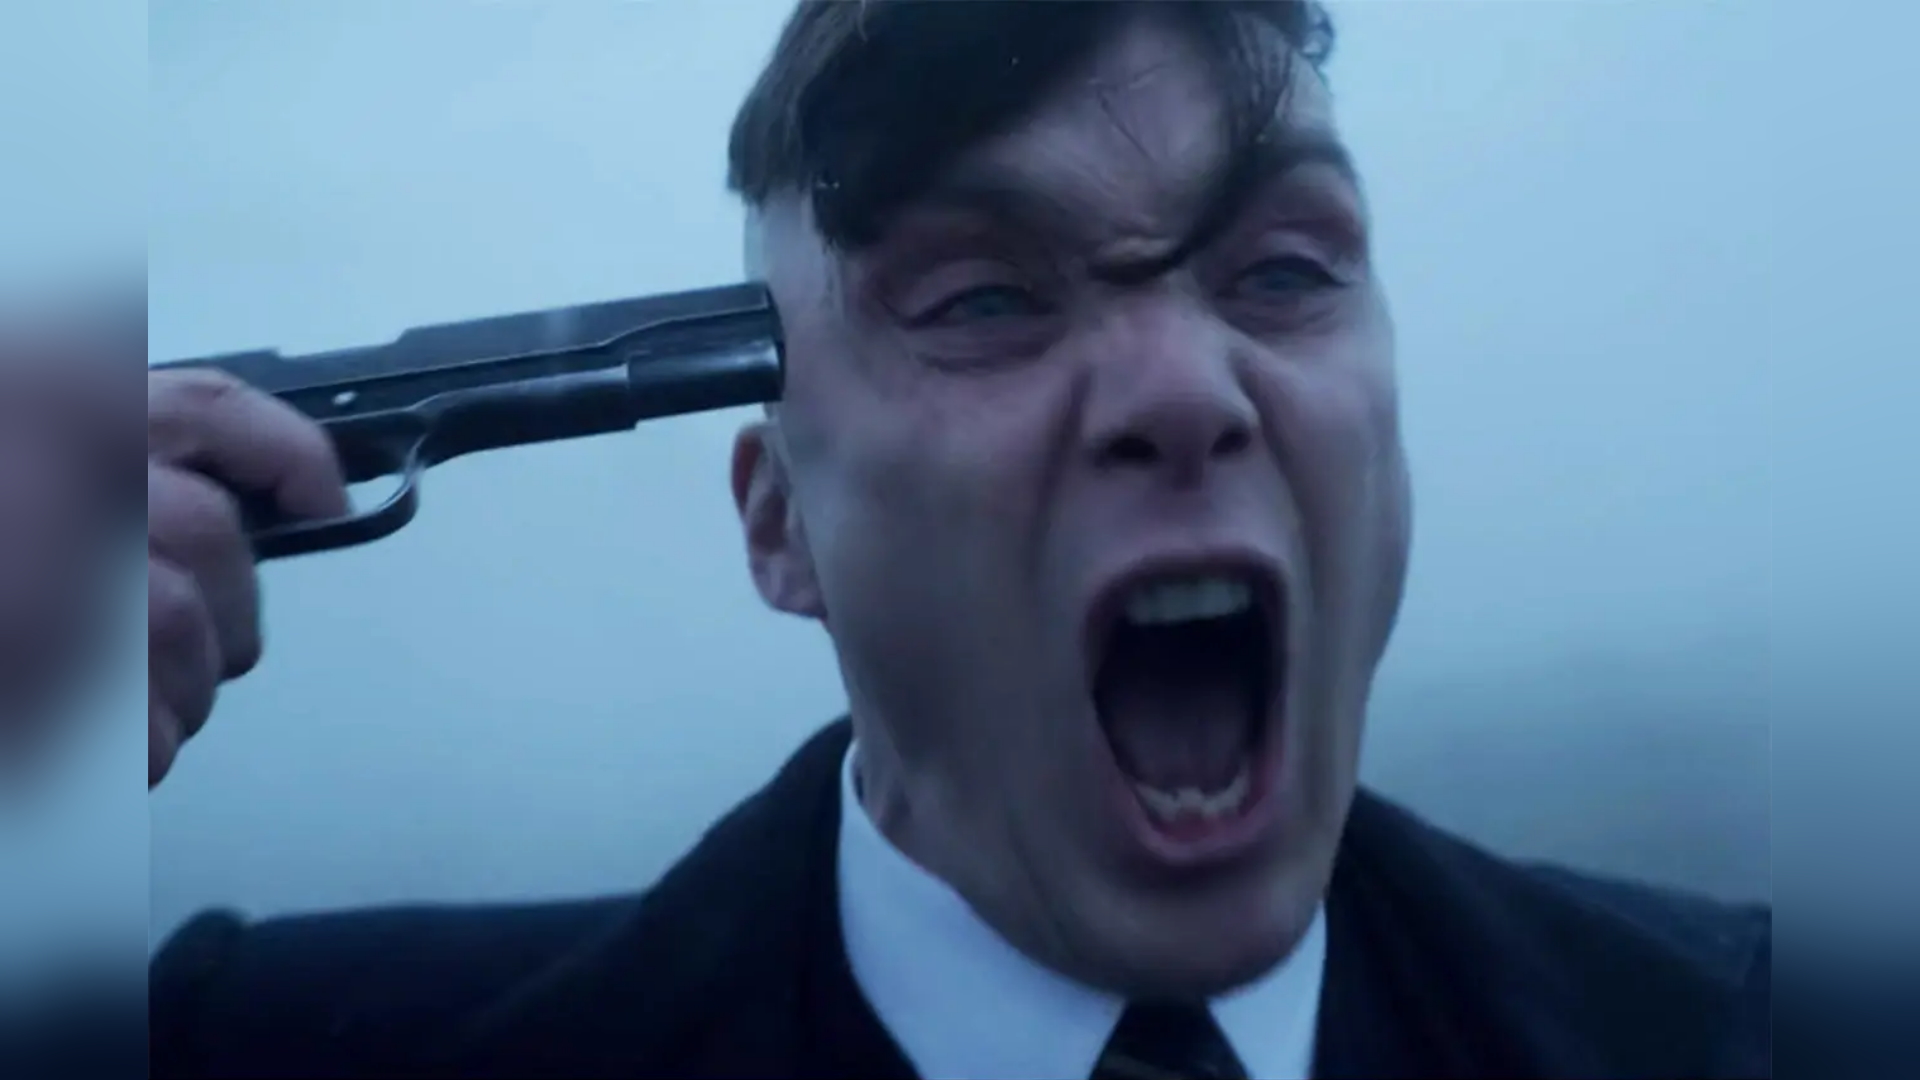 Tommy Shelby Holding a Gun to His Head | Know Your Meme